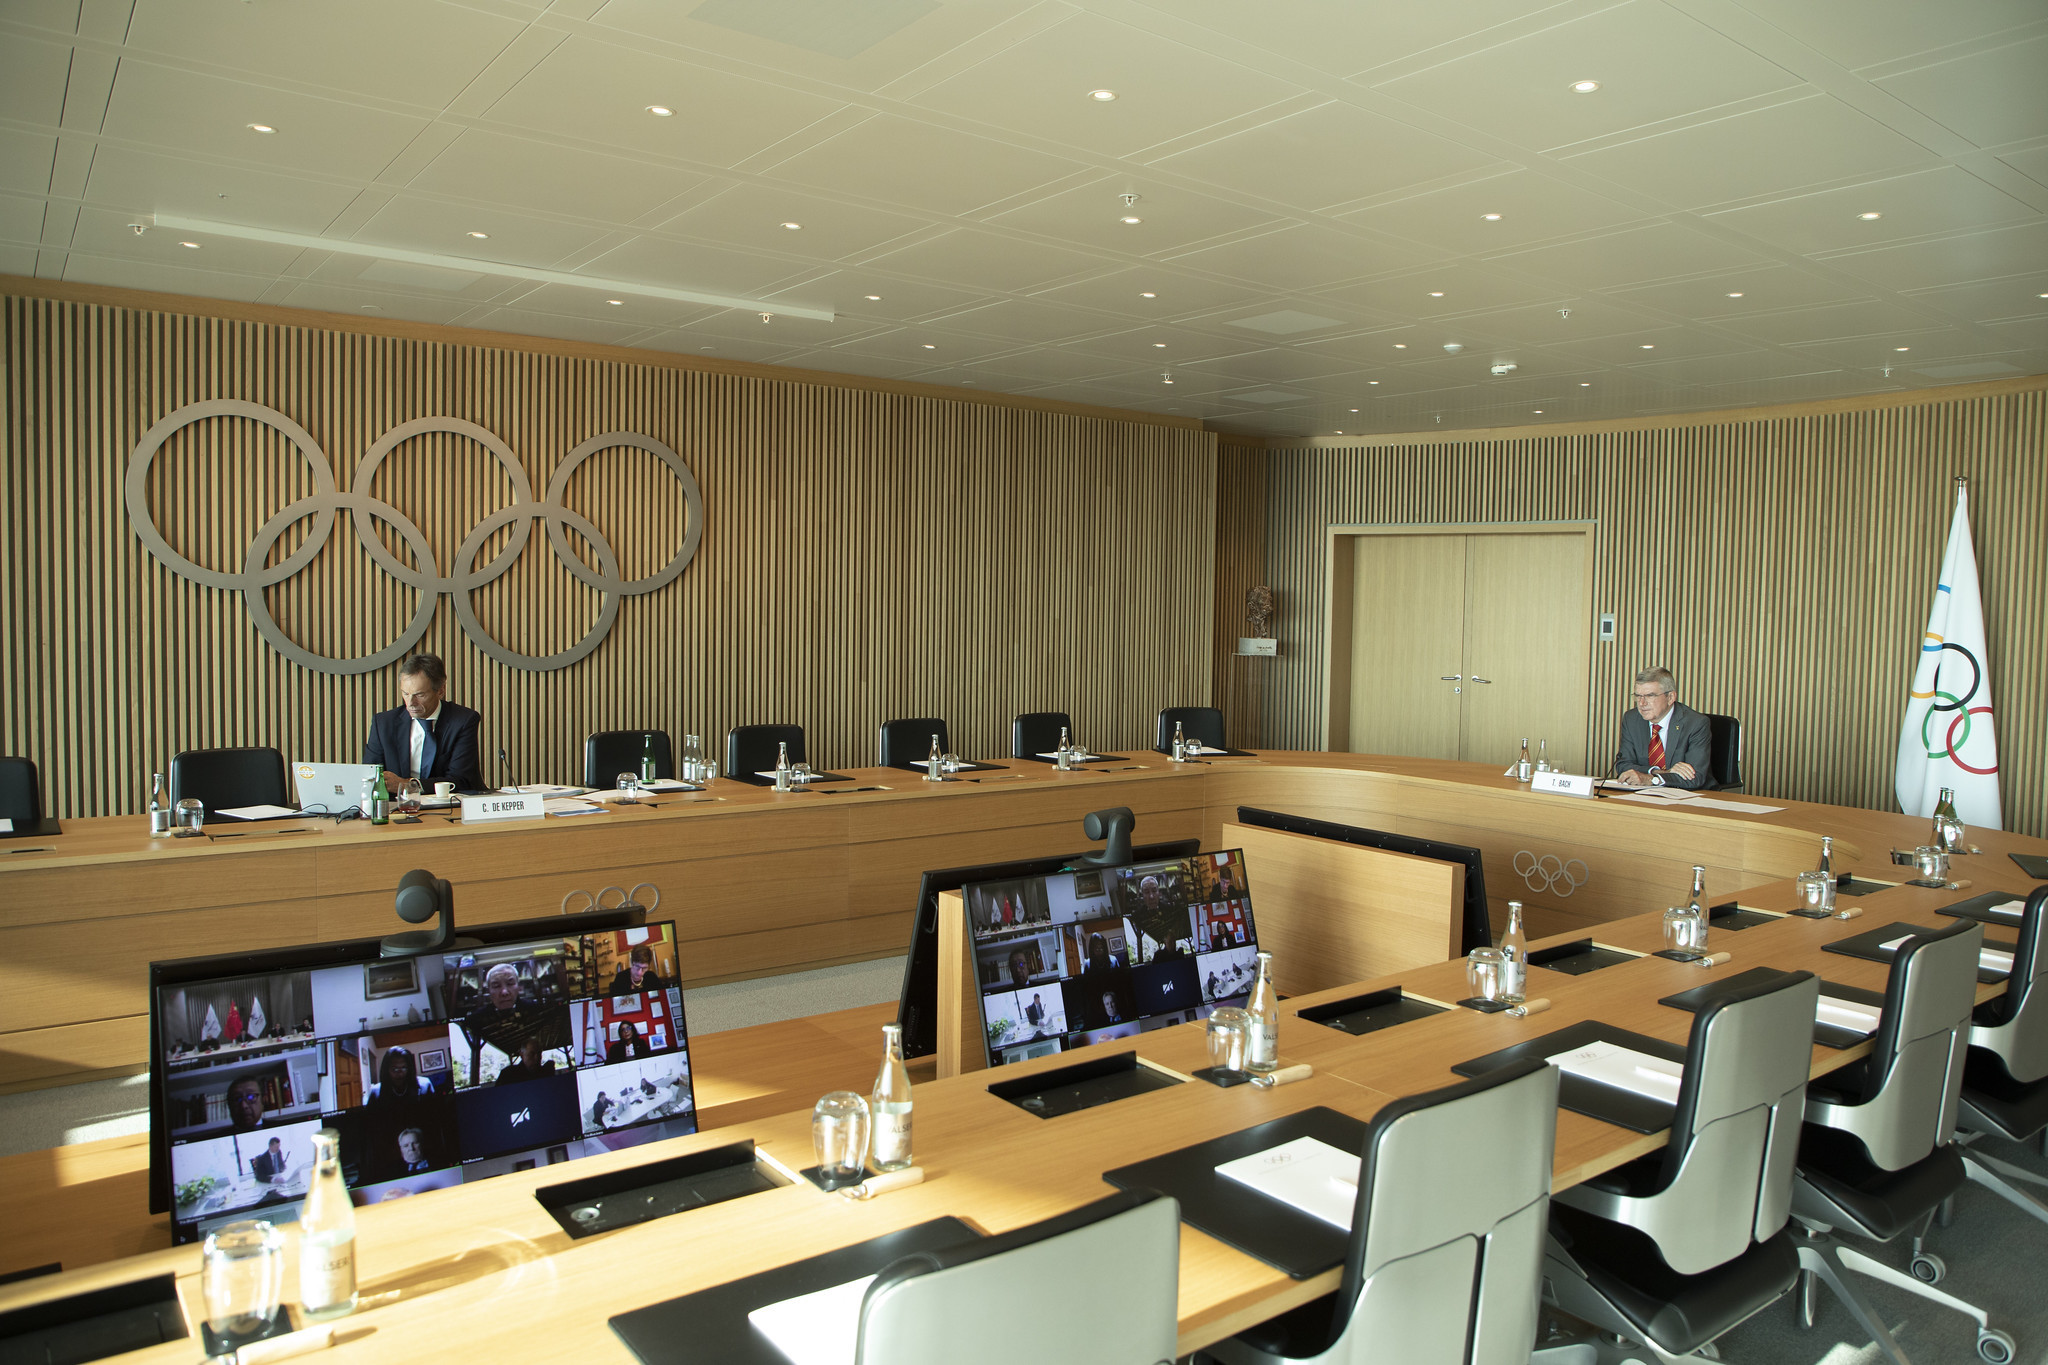 The IOC said the investigation into possible Olympic Charter breaches by the NOCRB is ongoing following an Executive Board meeting today ©IOC